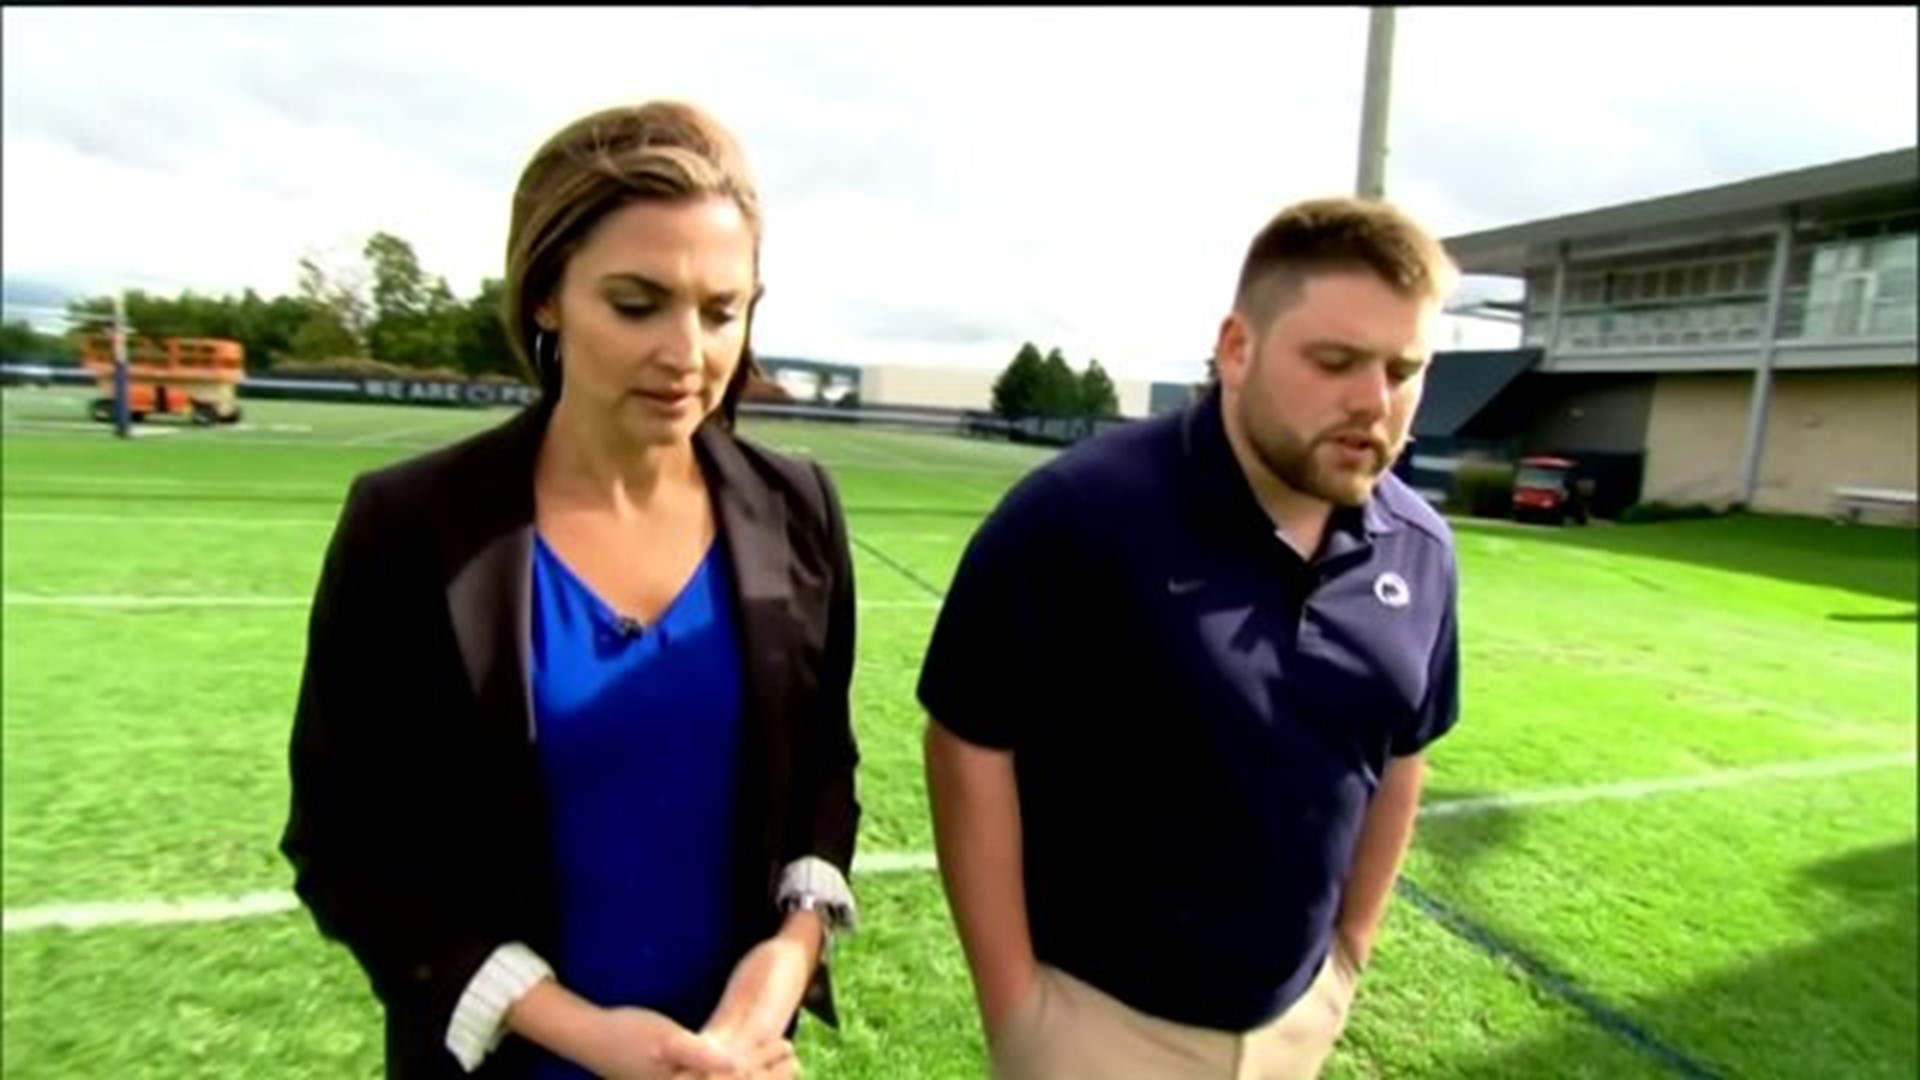 Penn State Football Player Discusses Eating Disorder